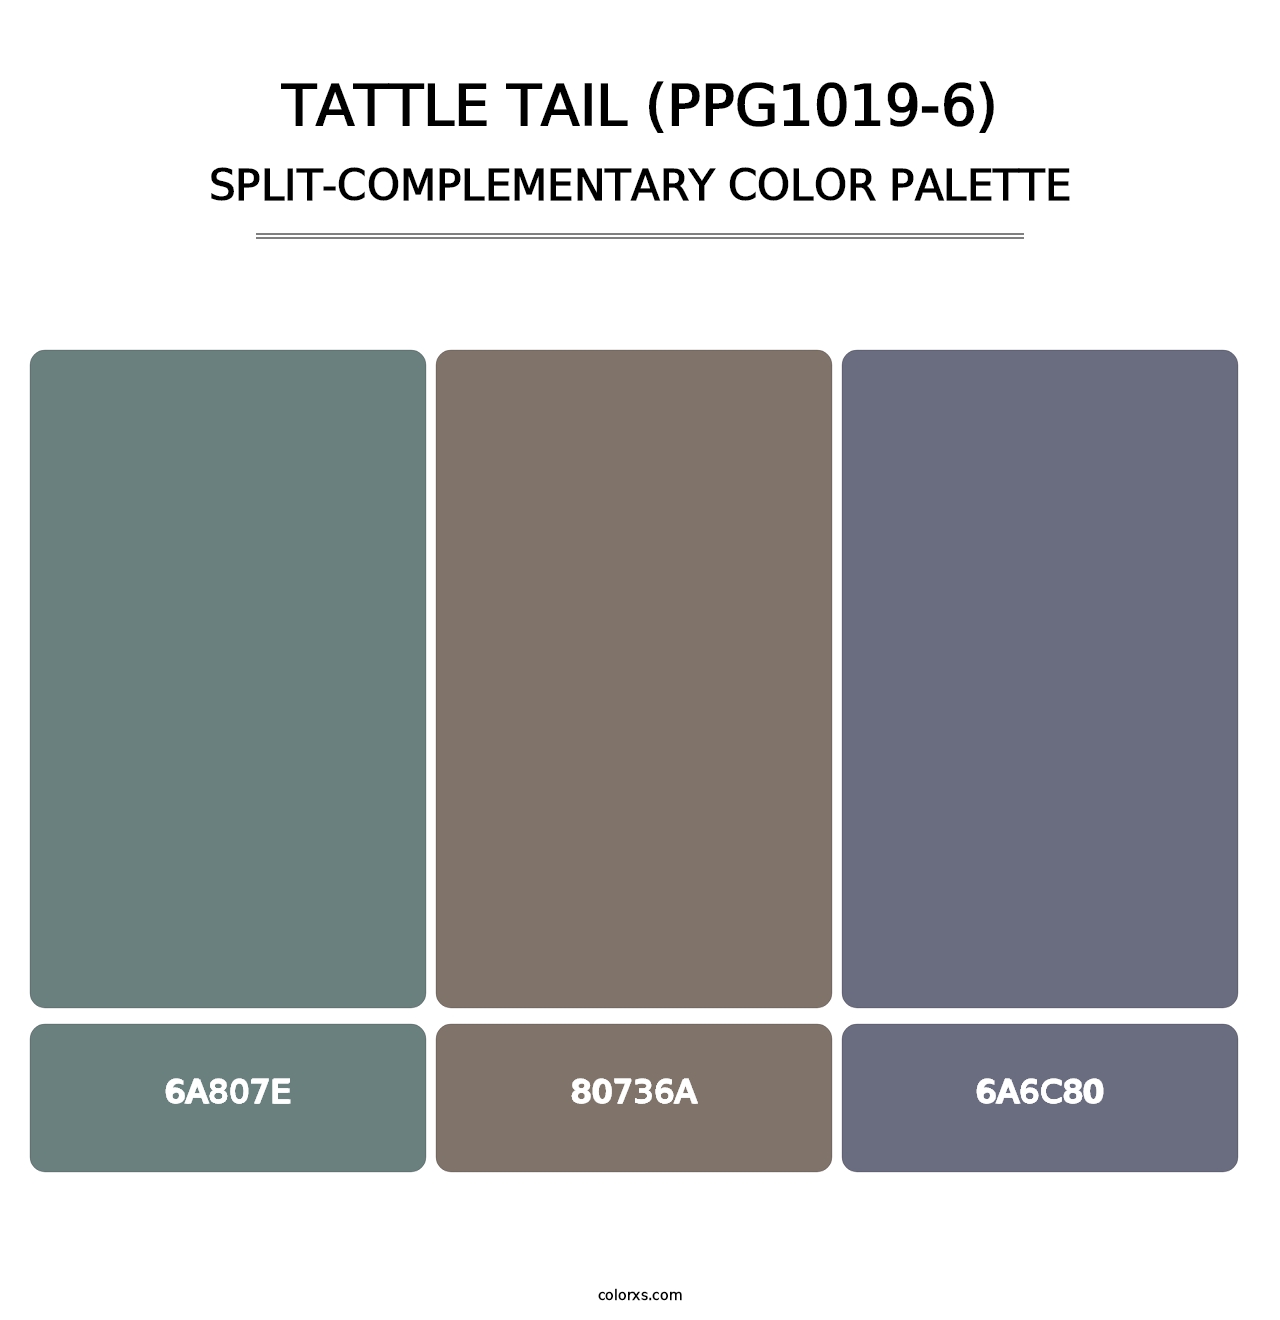 Tattle Tail (PPG1019-6) - Split-Complementary Color Palette